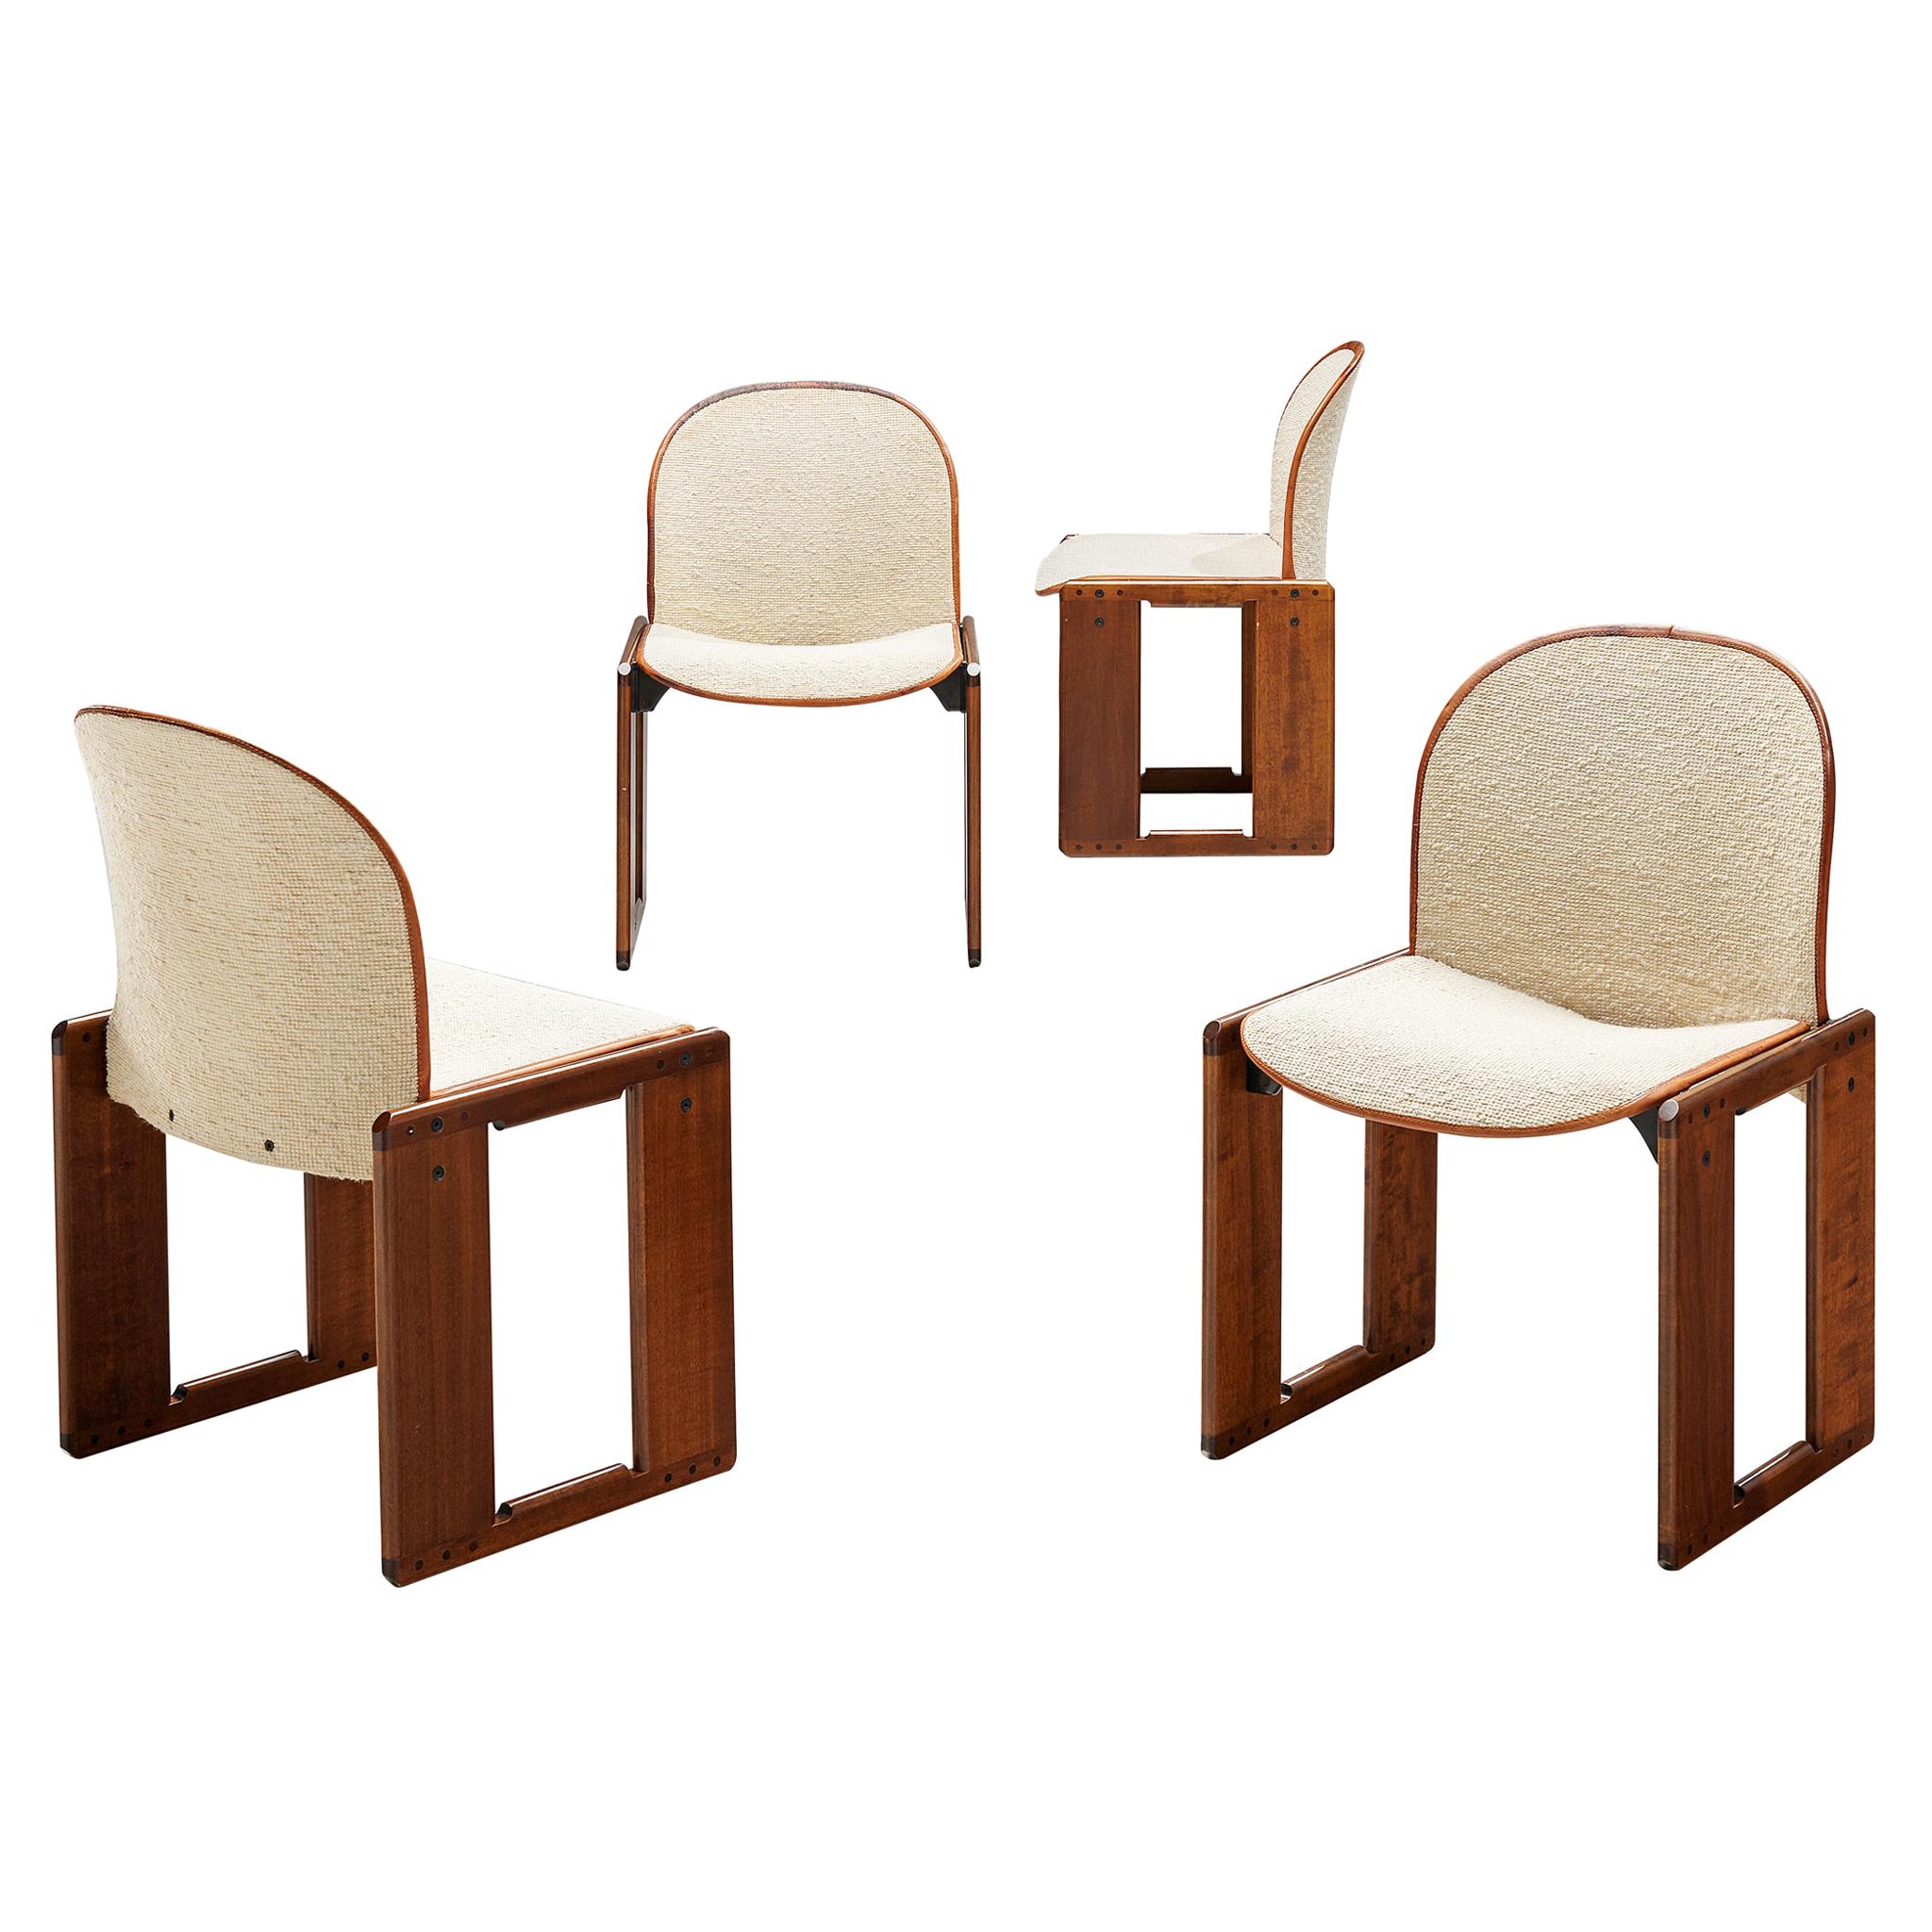 Private listing for Mrs. G. - 4 Dialogo chairs with Pierre Frey fabric